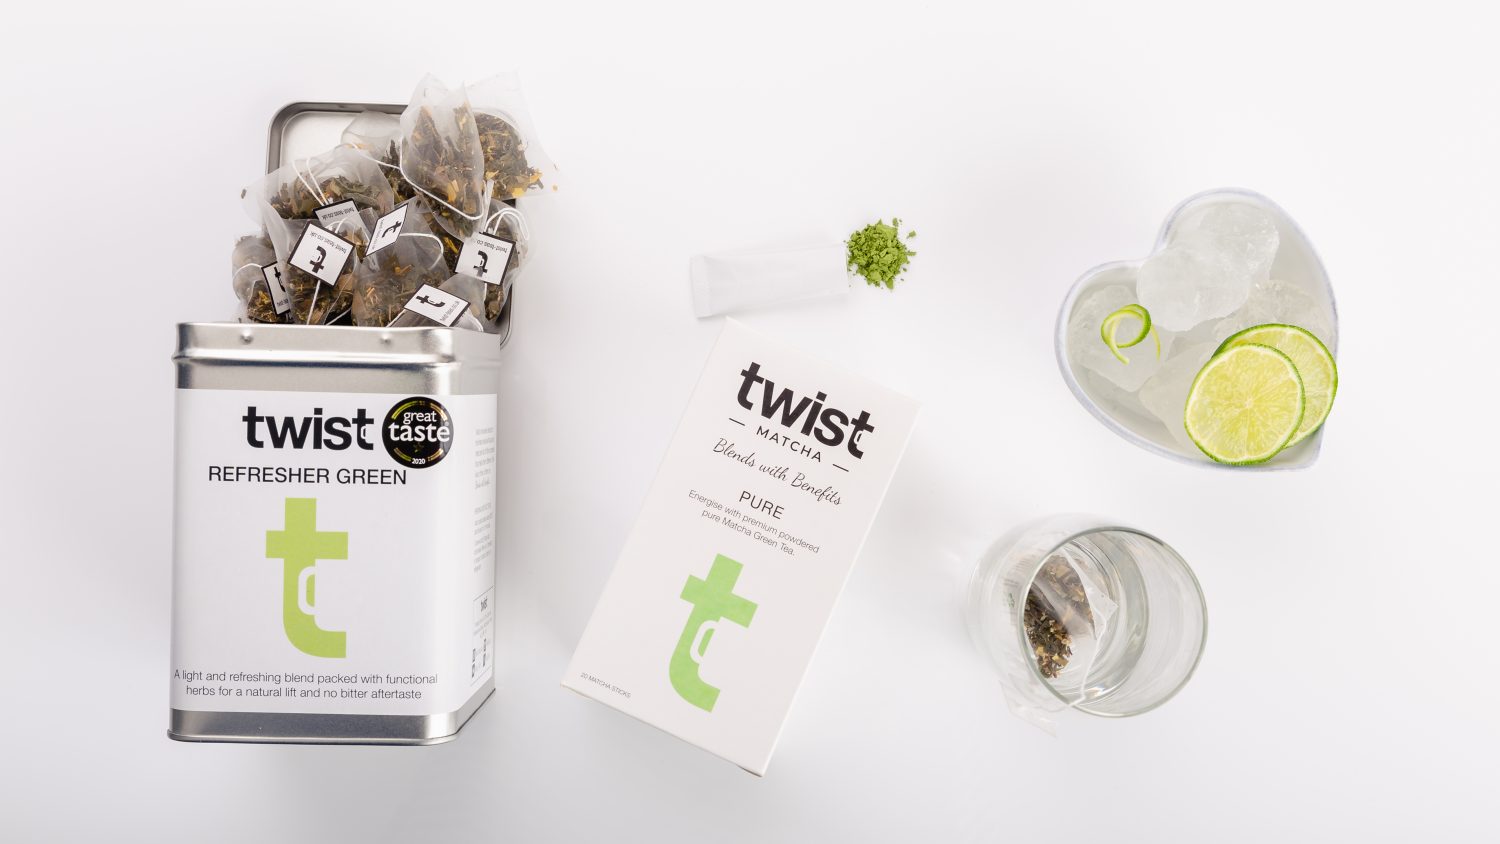 Twist Tea Great Taste Award 'Refresher Green' Tea, accompanied by the recommended Matcha blend.